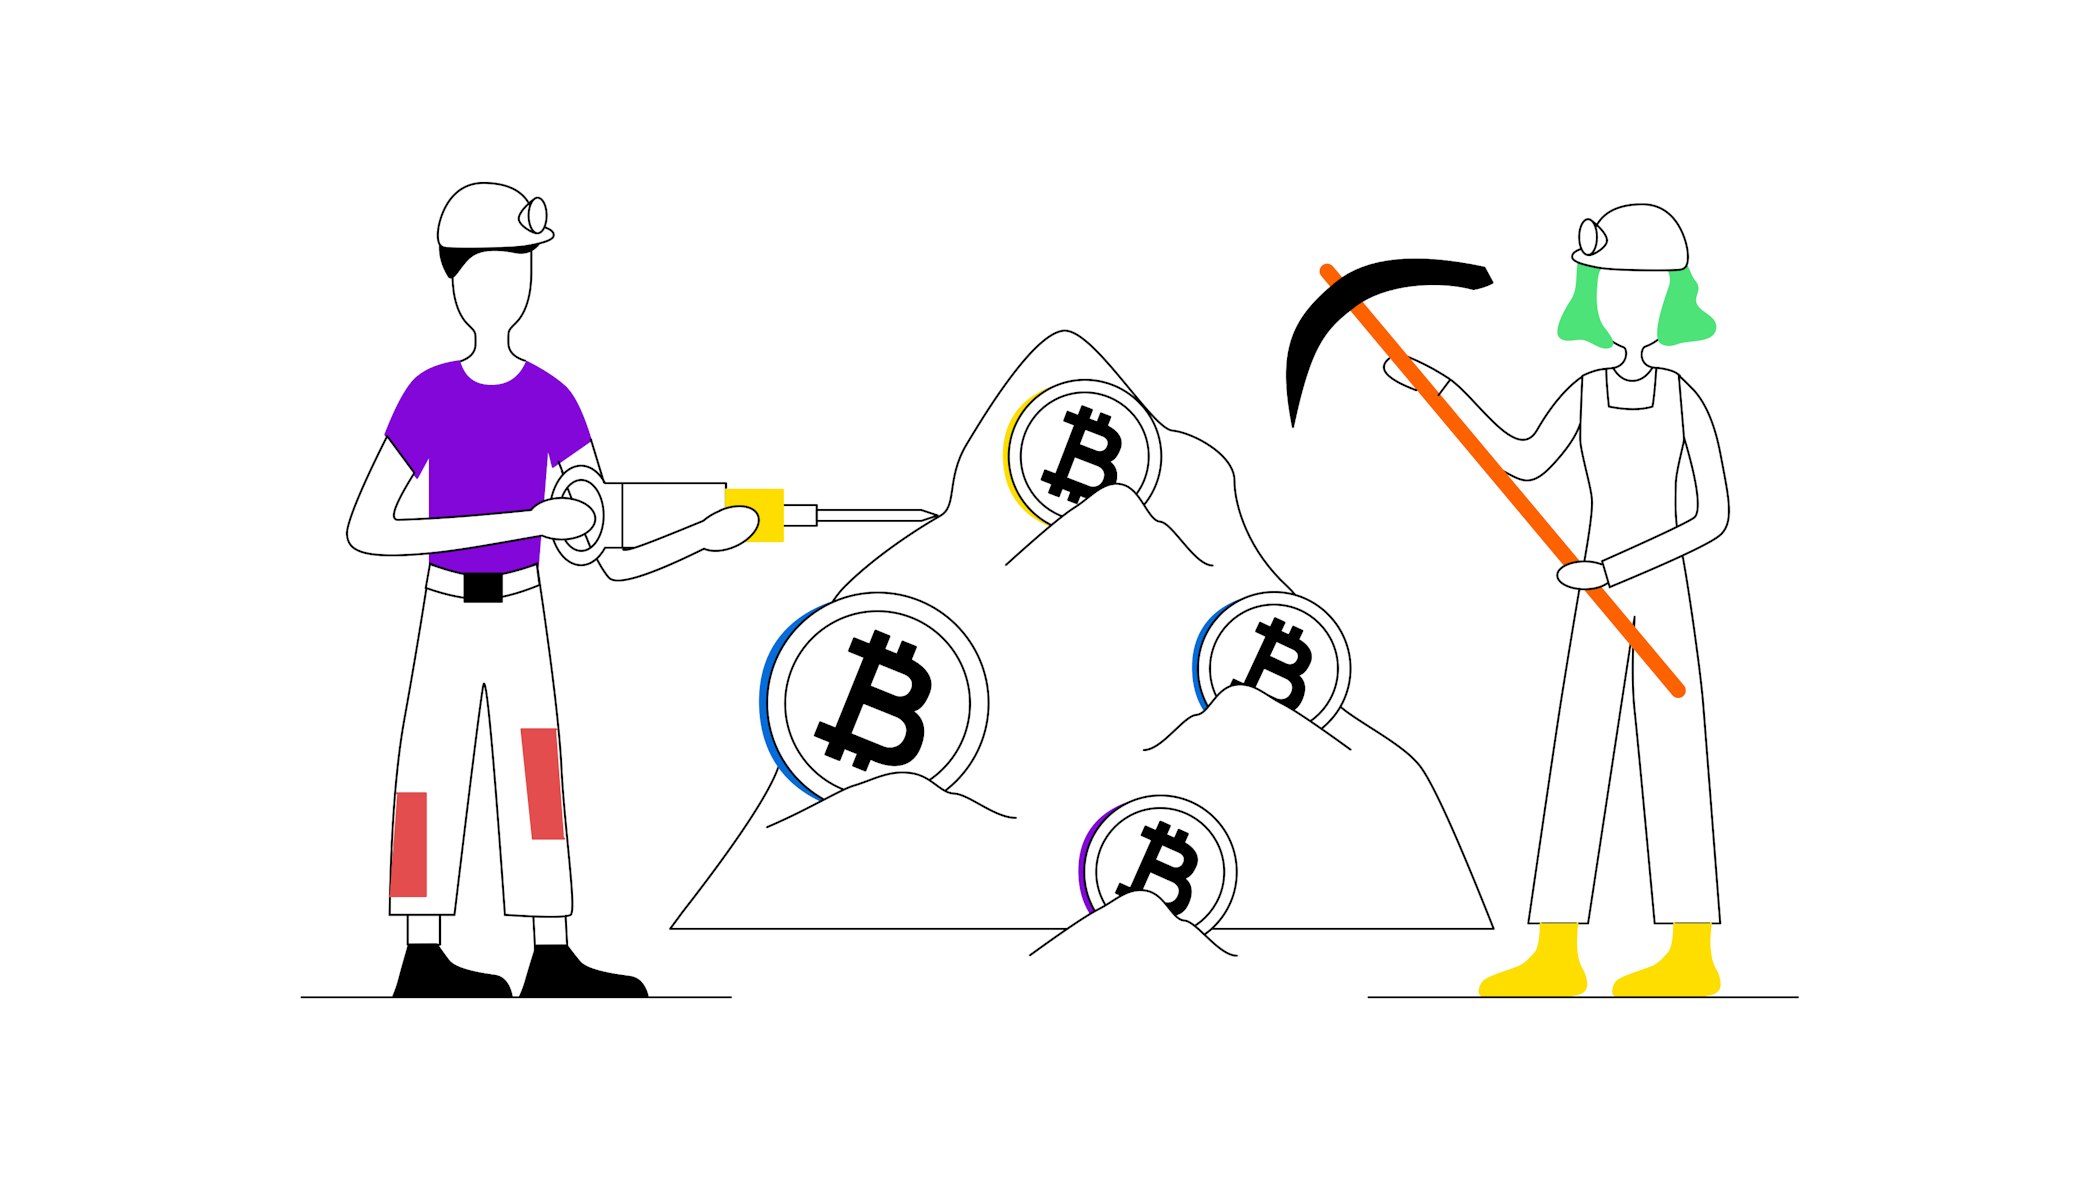 What Happens When Two Blocks are Mined Simultaneously? Bitcoin Chain Splits  Explained